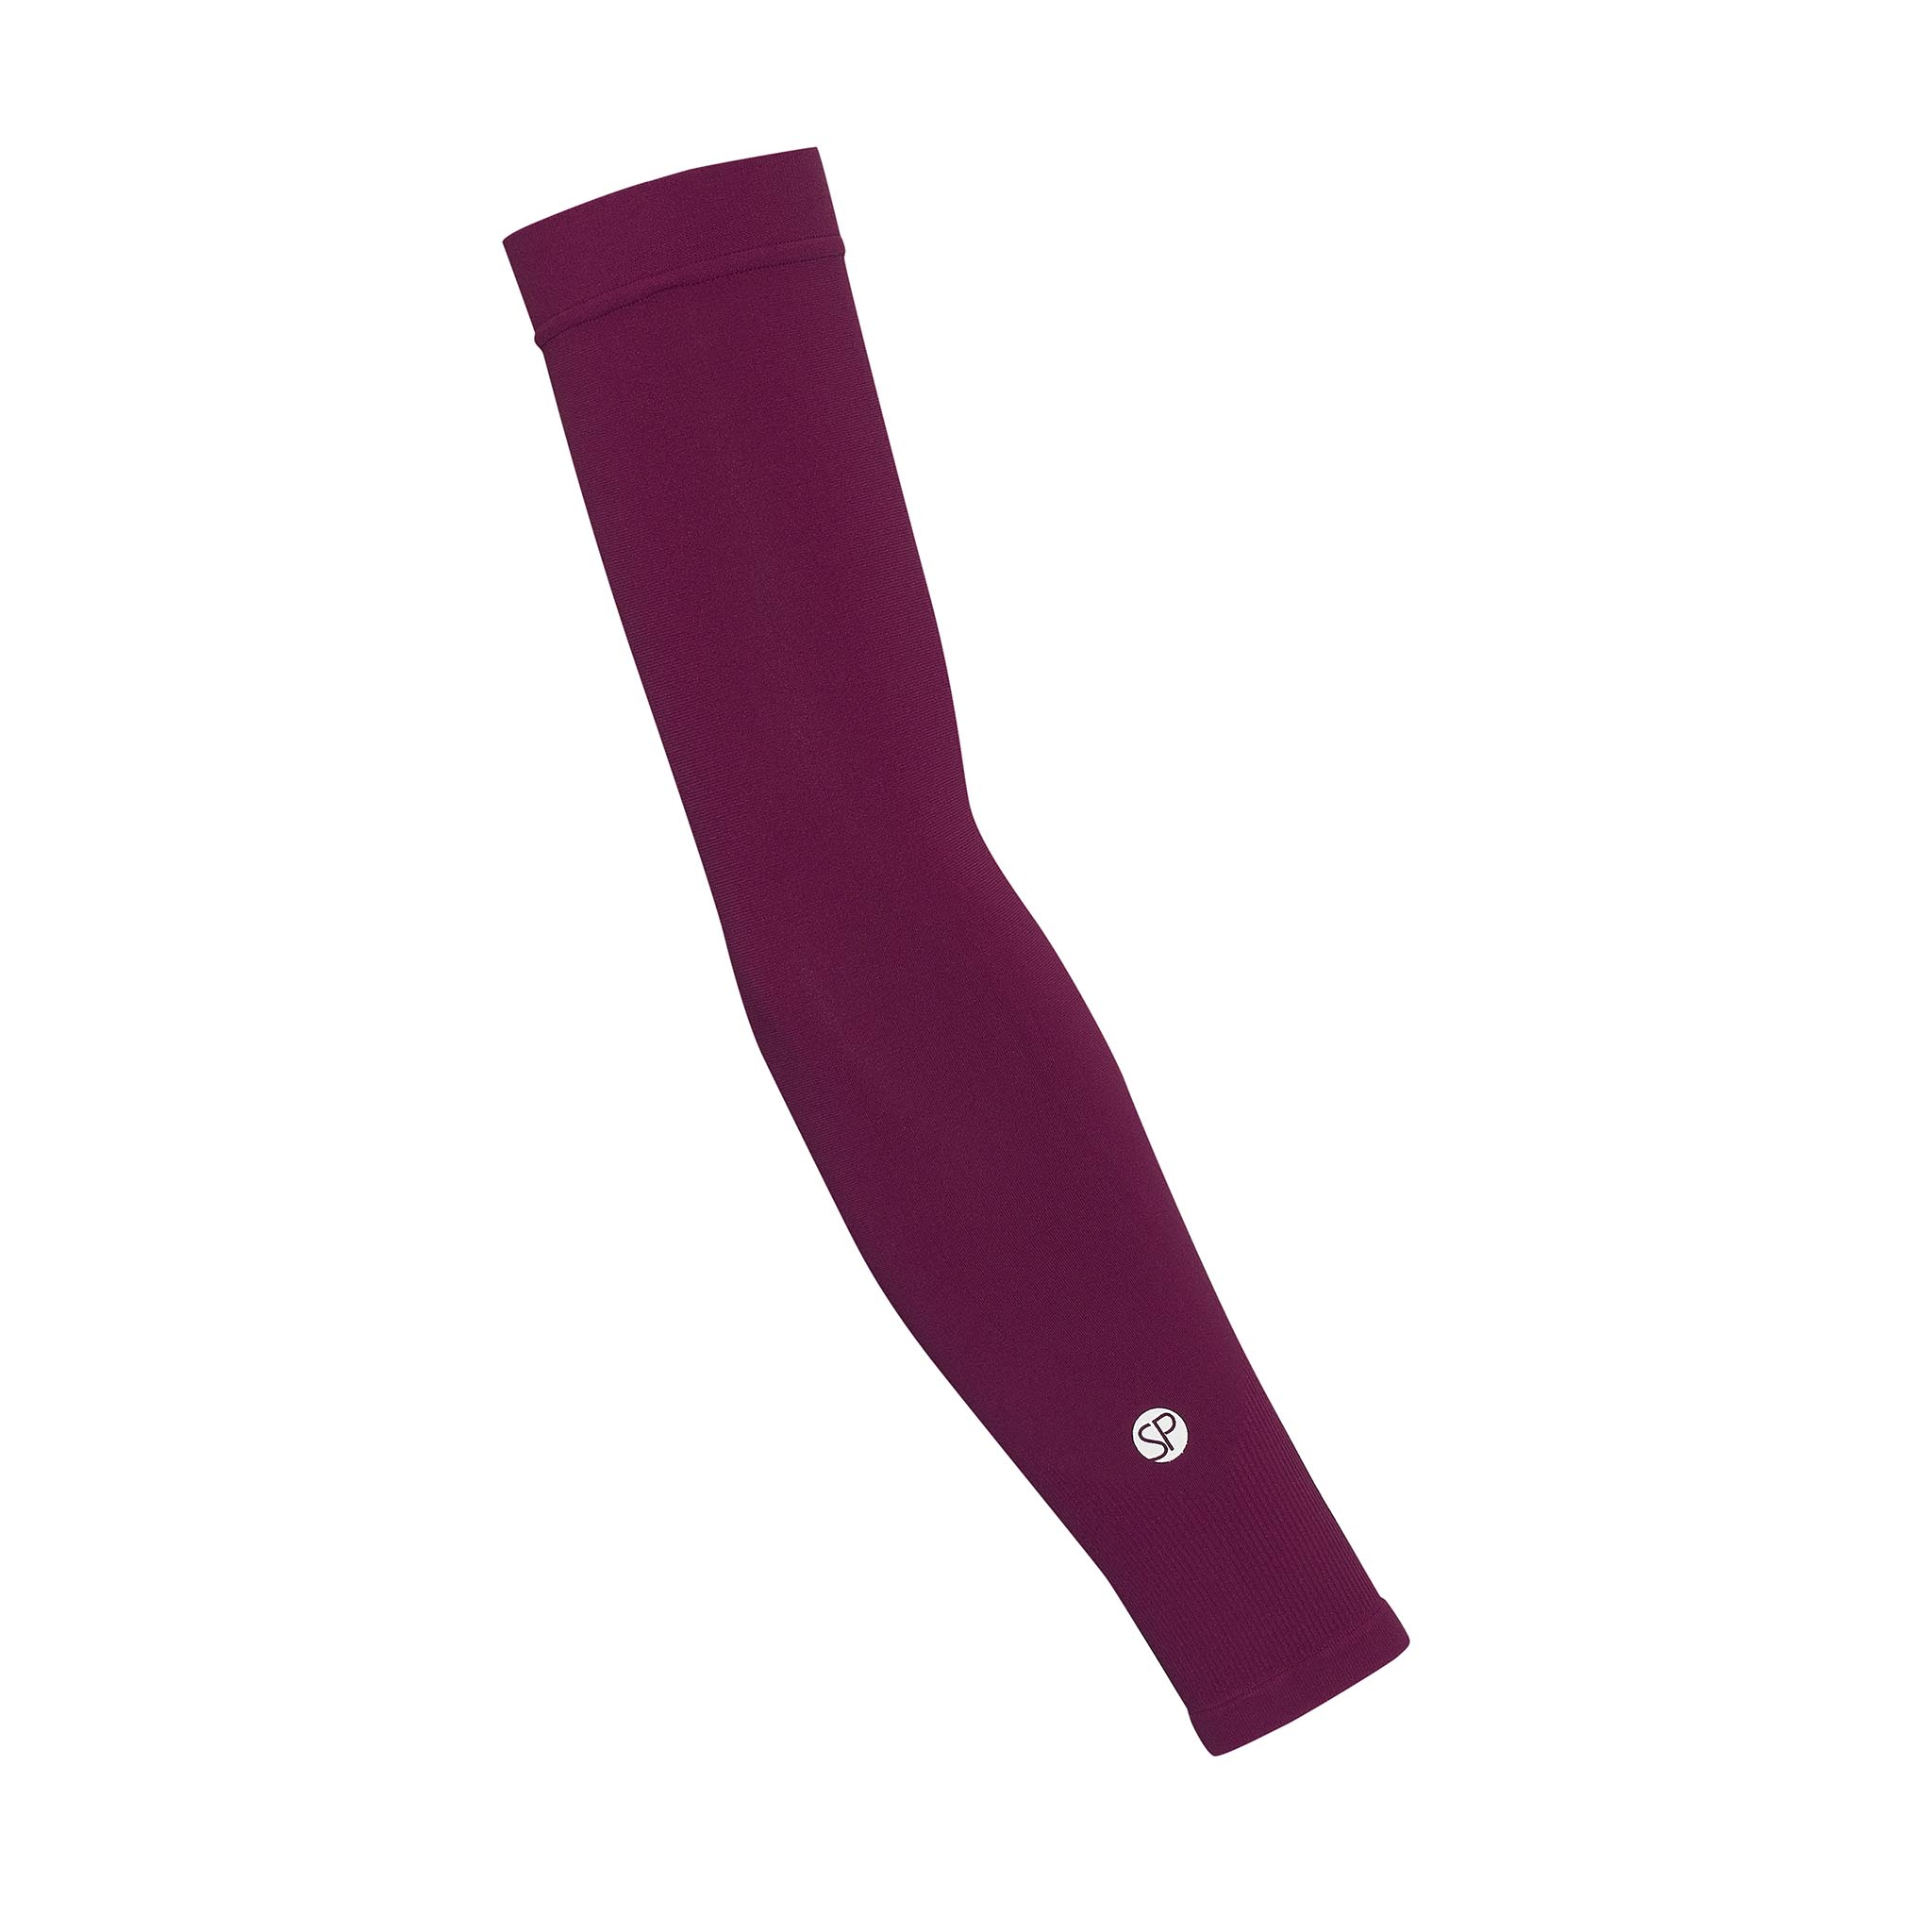 Buy Compression Garment Arm Sleeve with Shoulder Cover from official  supplier in dubai UAE